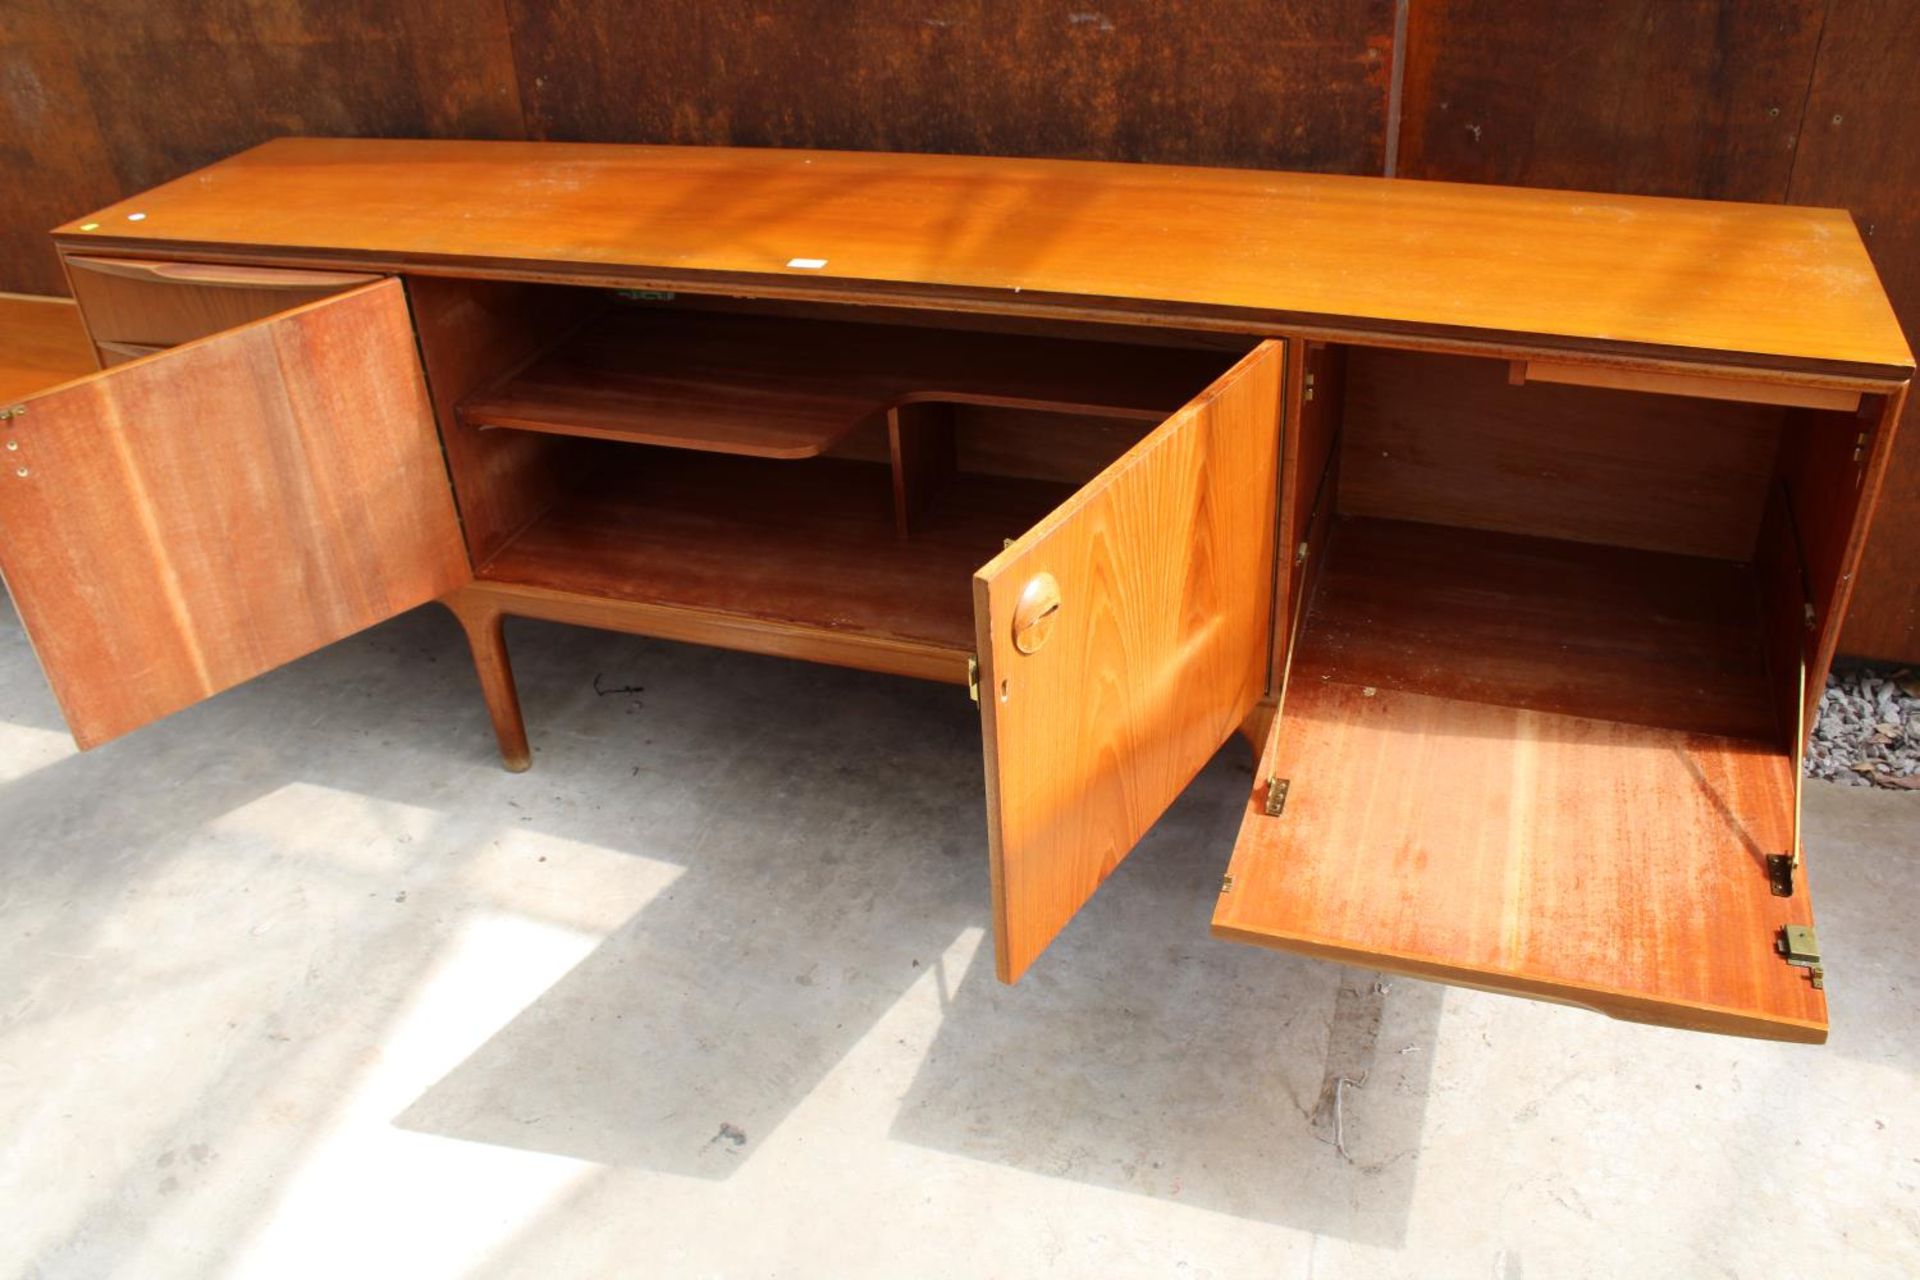 A McINTOSH RETRO TEAK SIDEBOARD ENCLOSING 3 DRAWERS AND 3 CUPBOARDS, 84" WIDE - Image 6 of 7